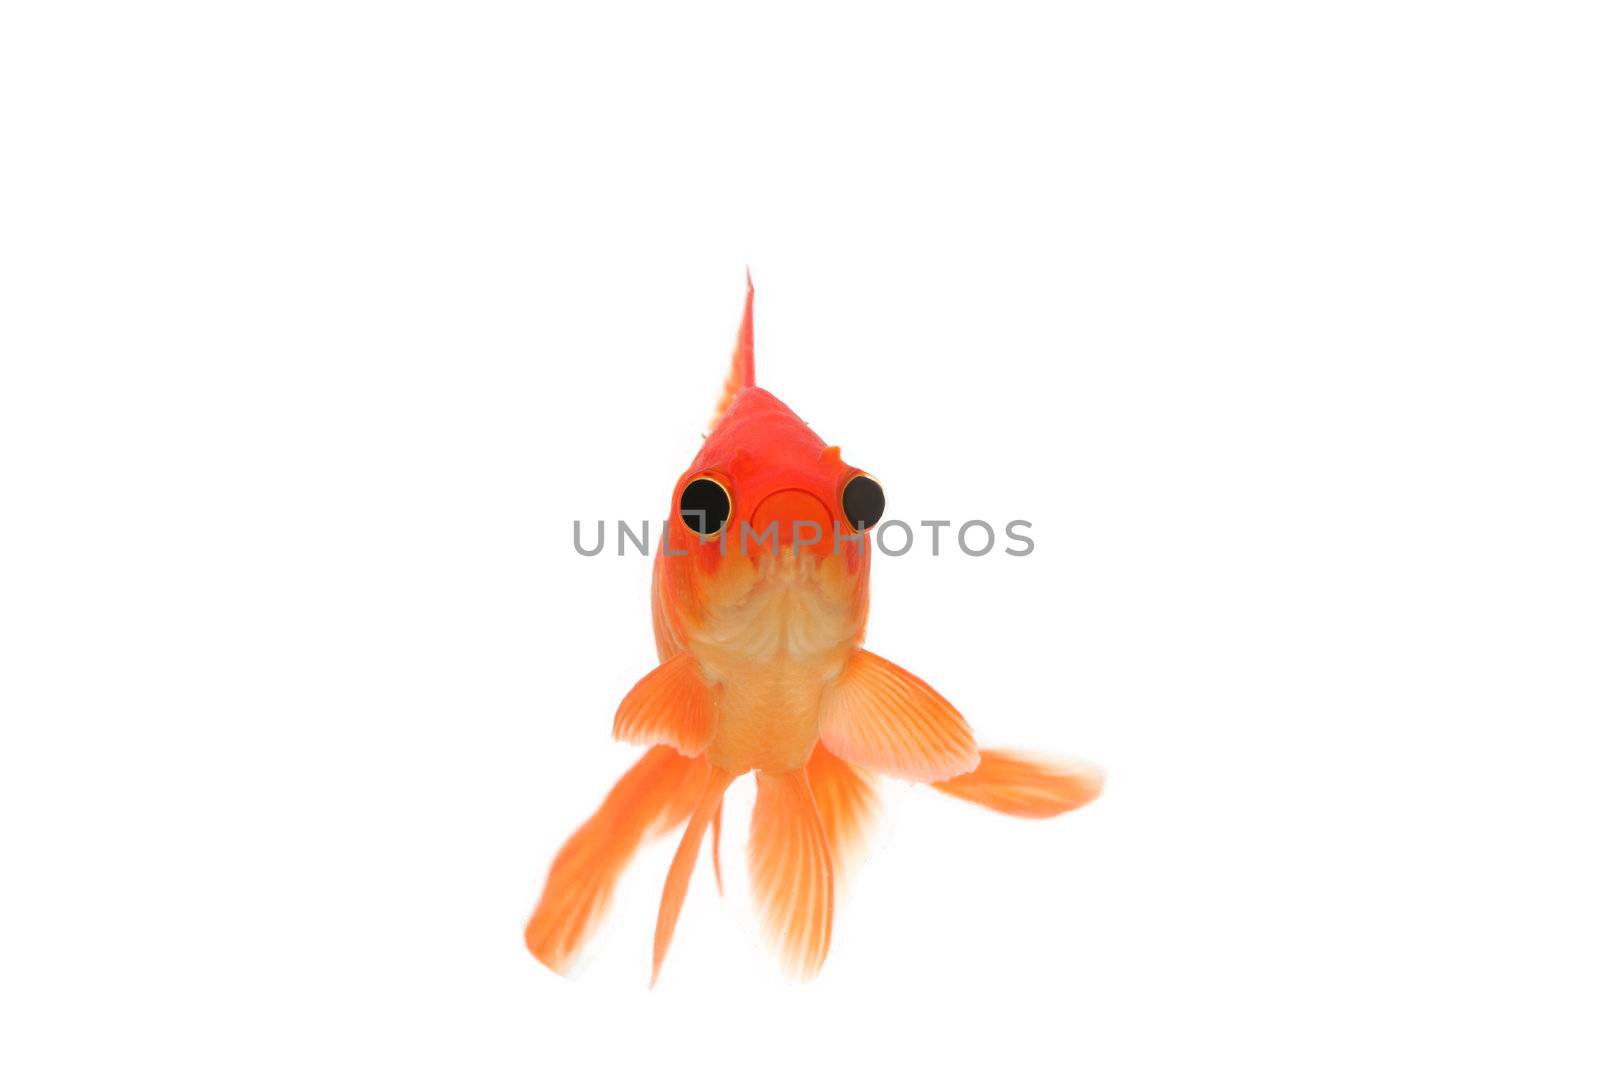 Humourous fantail goldfish with bloated eyes